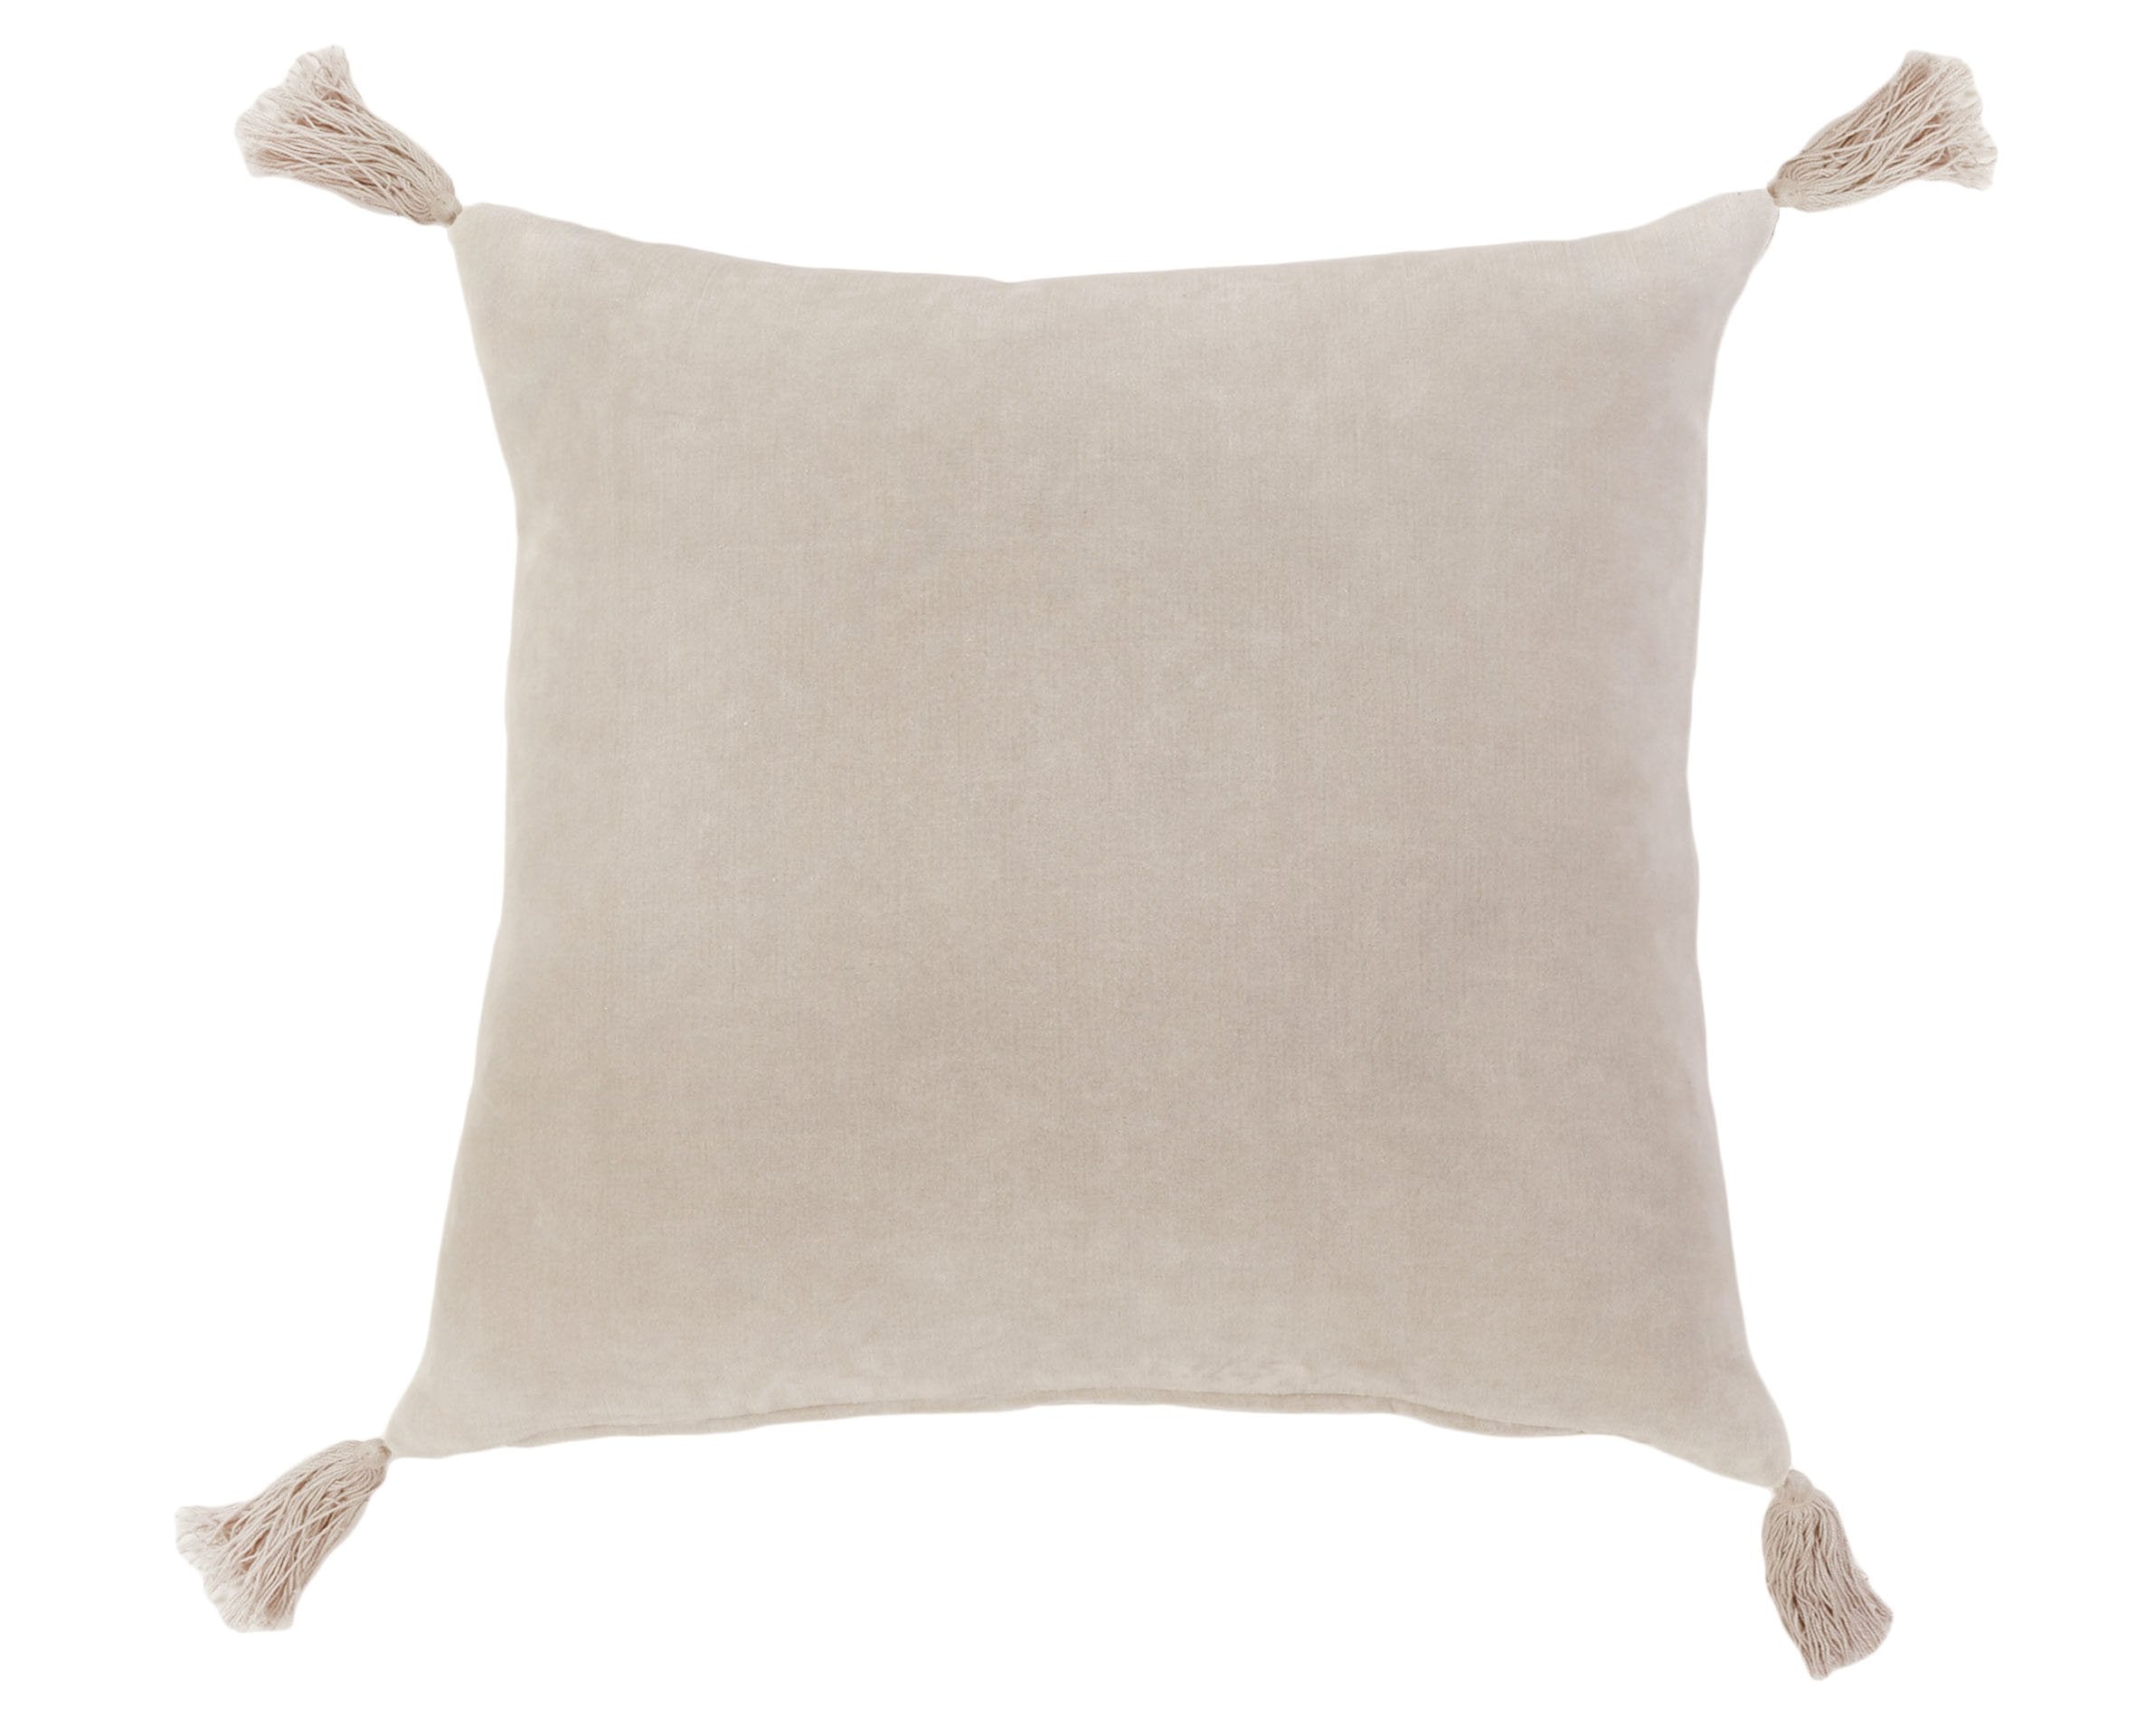 Bianca 20"x20" Pillow with Insert - Blush Color -Pom Pom at Home